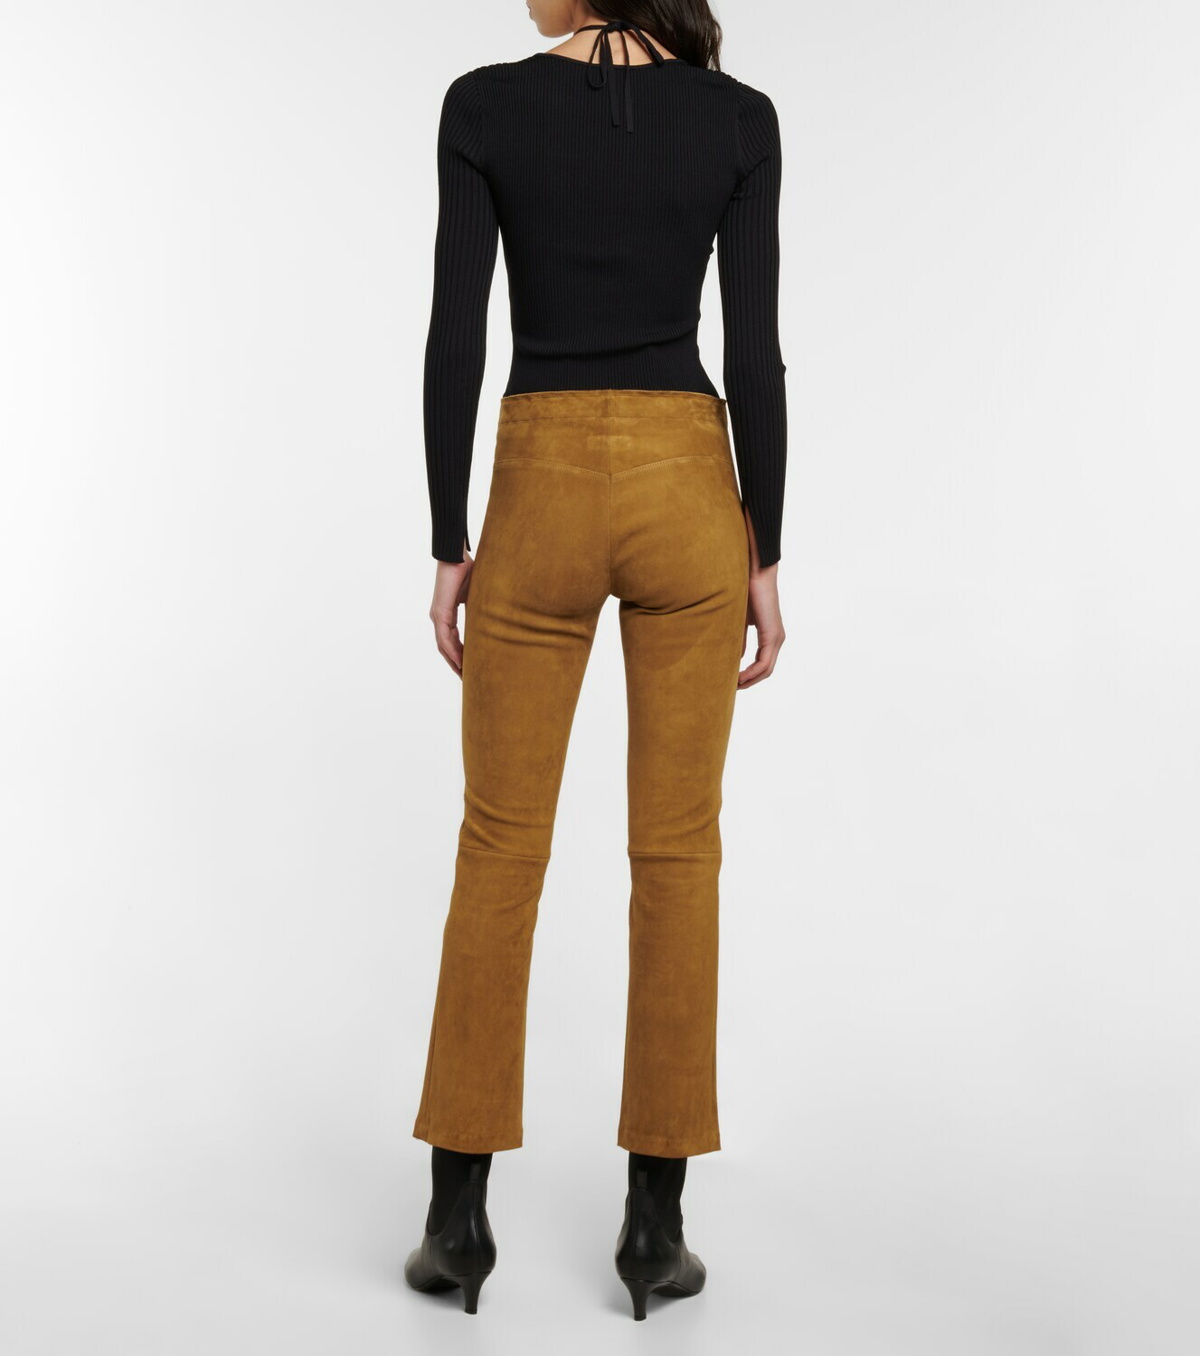 Stouls Cherilyn high-rise suede flared pants Stouls